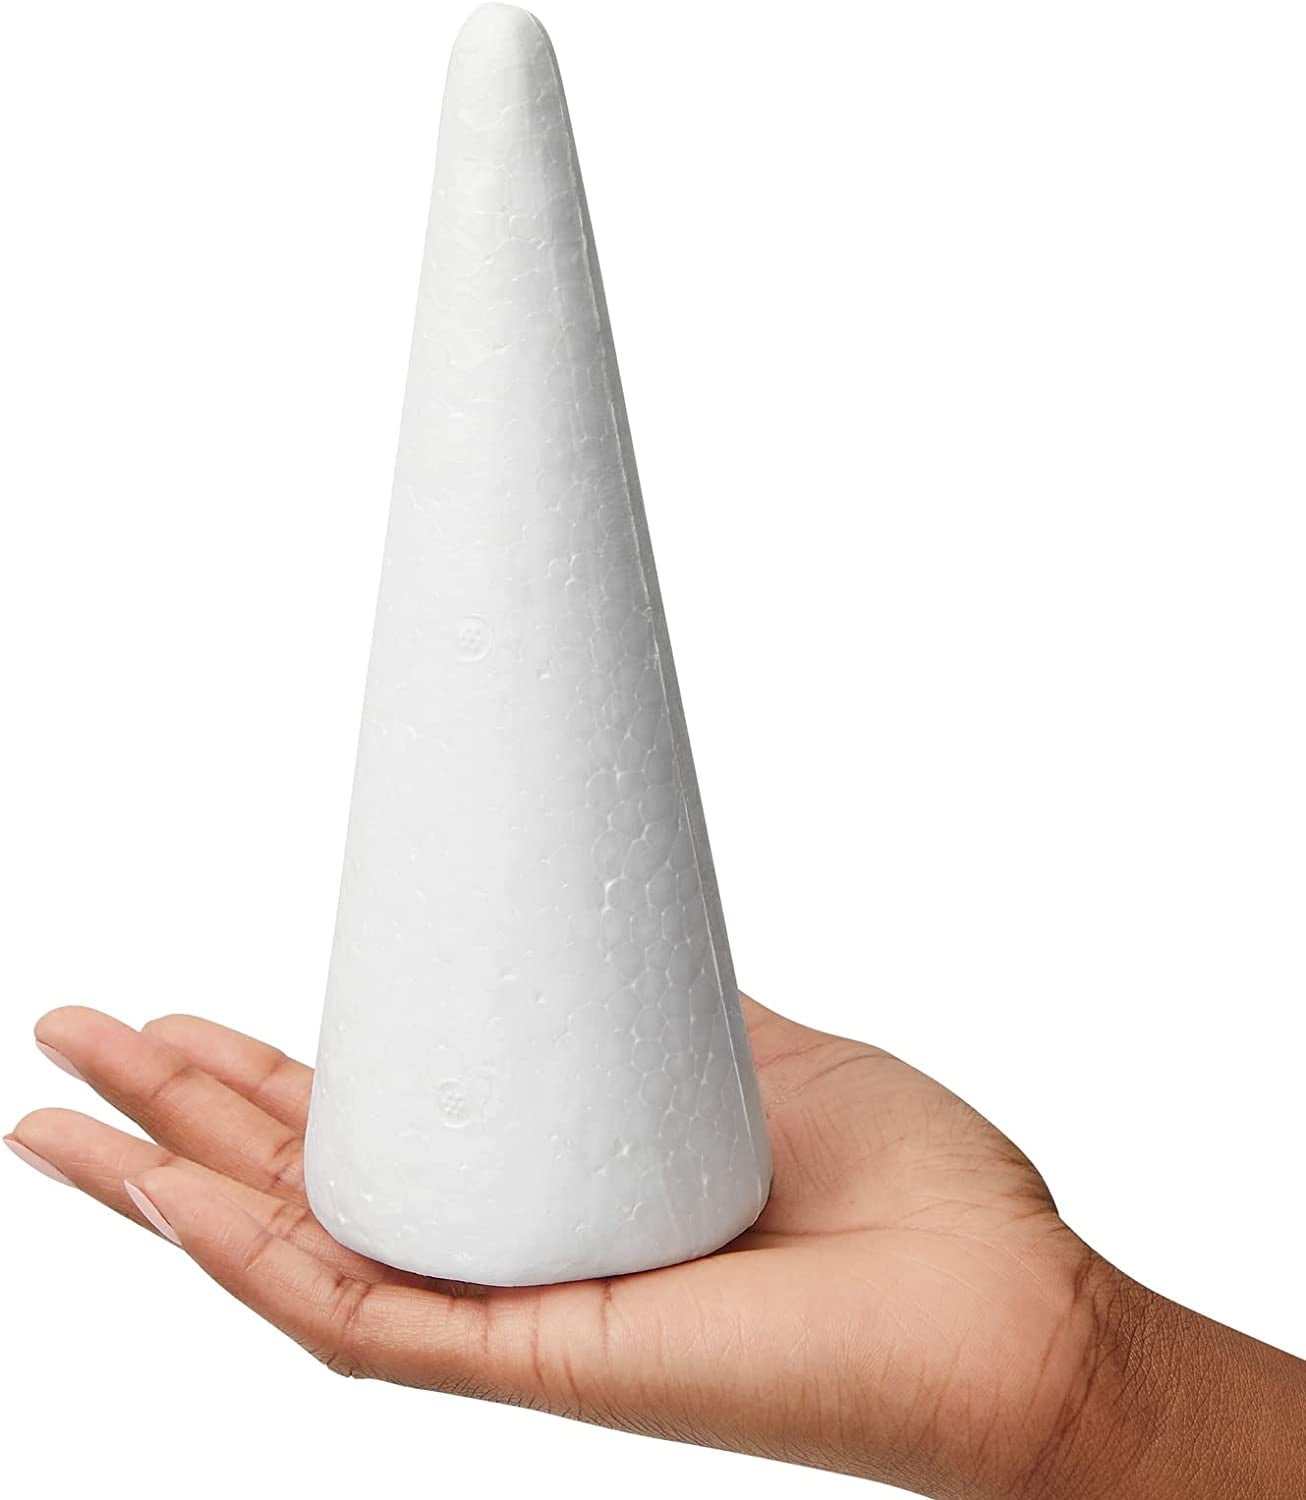 12 Pack Craft Foam - Foam Cones For Crafts, Trees, Holiday Gnomes,  Christmas Decorations, DIY Art Projects (7.3x2.7 In)